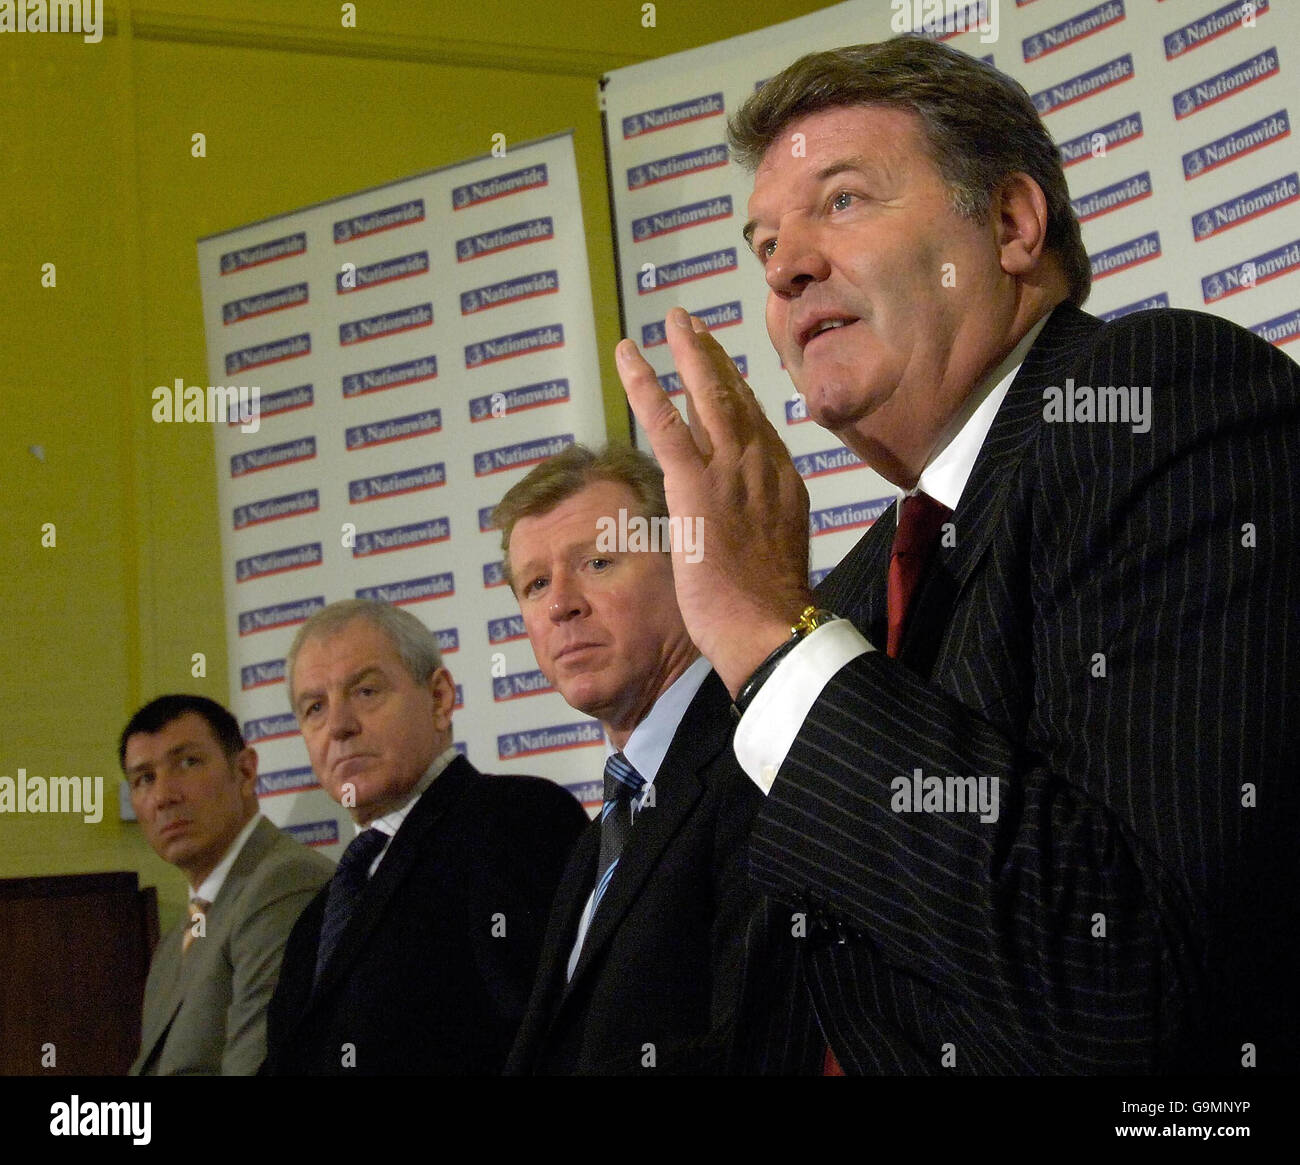 Four Home Nation Managers (L-R) Northern Ireland manager Lawrie Sanchez, Scotland manager Walter Smith, England manager Steve McClaren and Welsh manager John Toshack during the launch of the 'Cats Eyes For Kids' scheme at St George's Primary School, London. Stock Photo